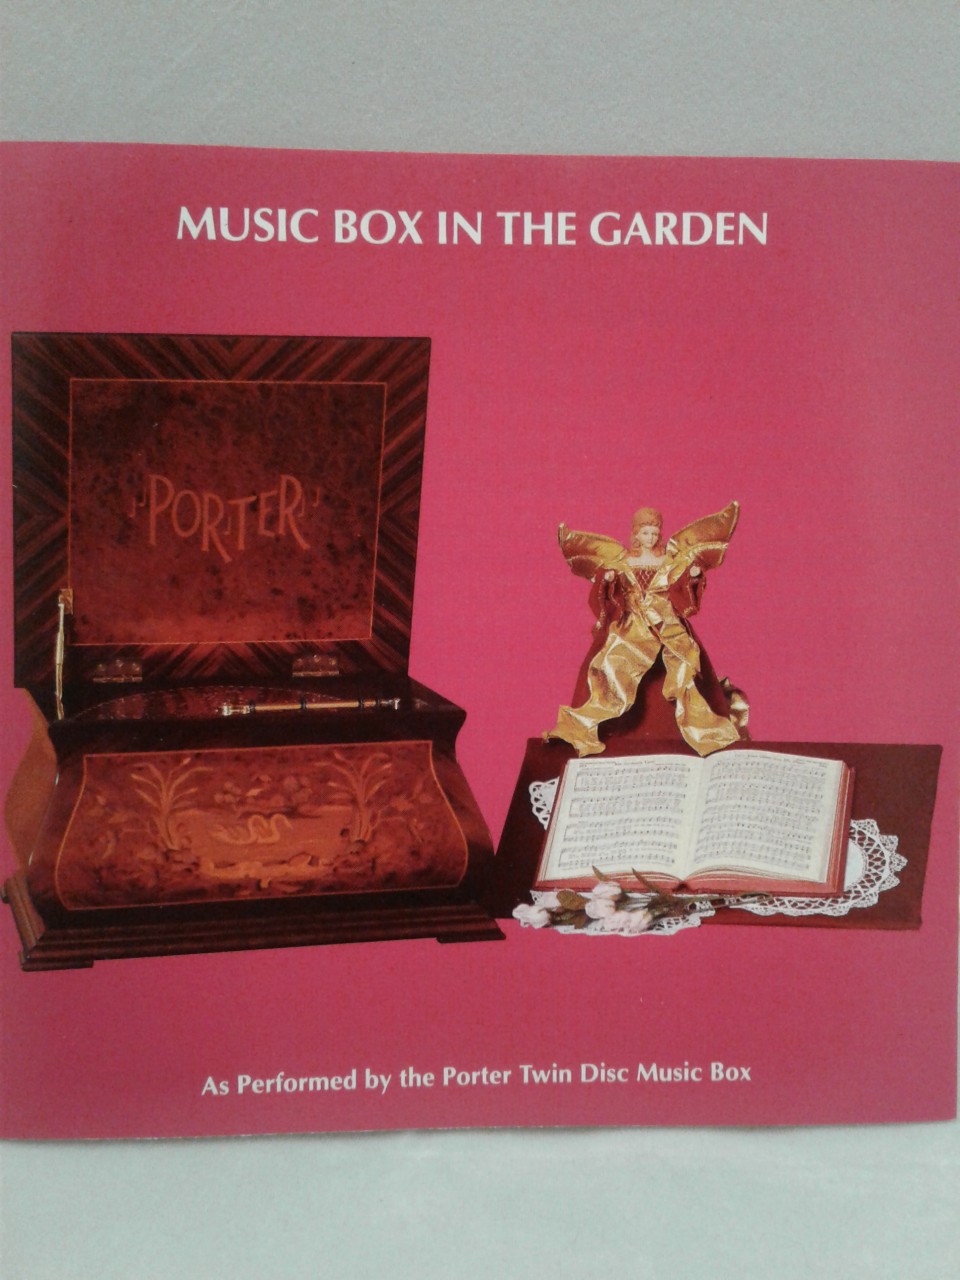 Cottage Garden Music Box Trust in the Lord Plays His Eye on the Sparrow MB1643S